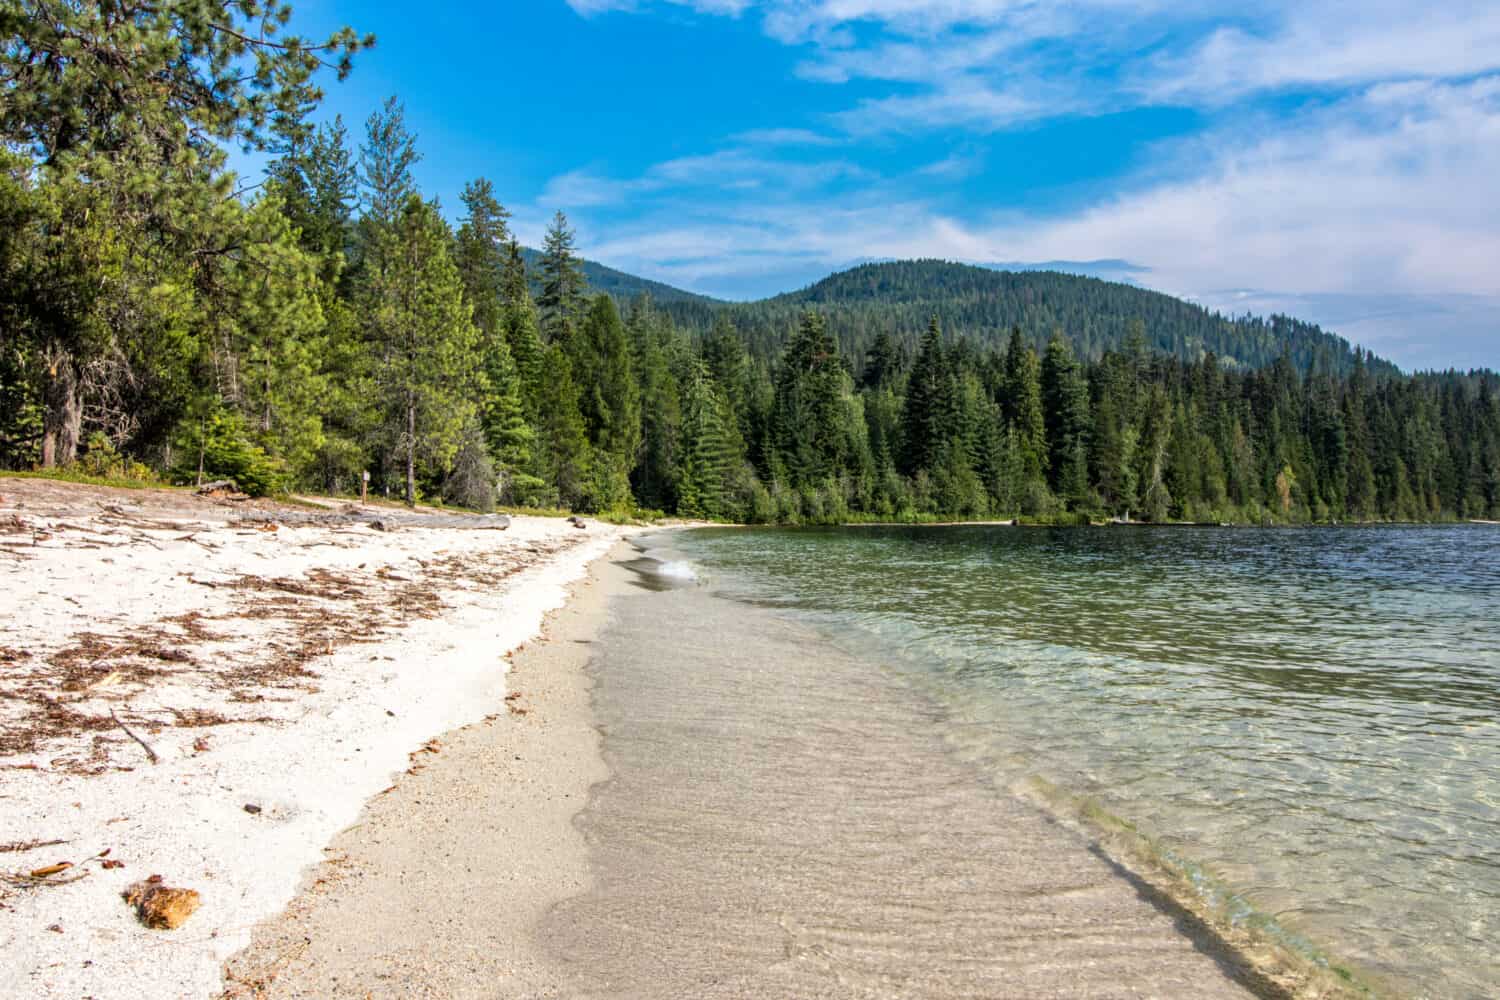 Sandy beach at Priest Lake Idaho with small waves in clear blue water, blue sky's and trees and forest in the background during summer season.